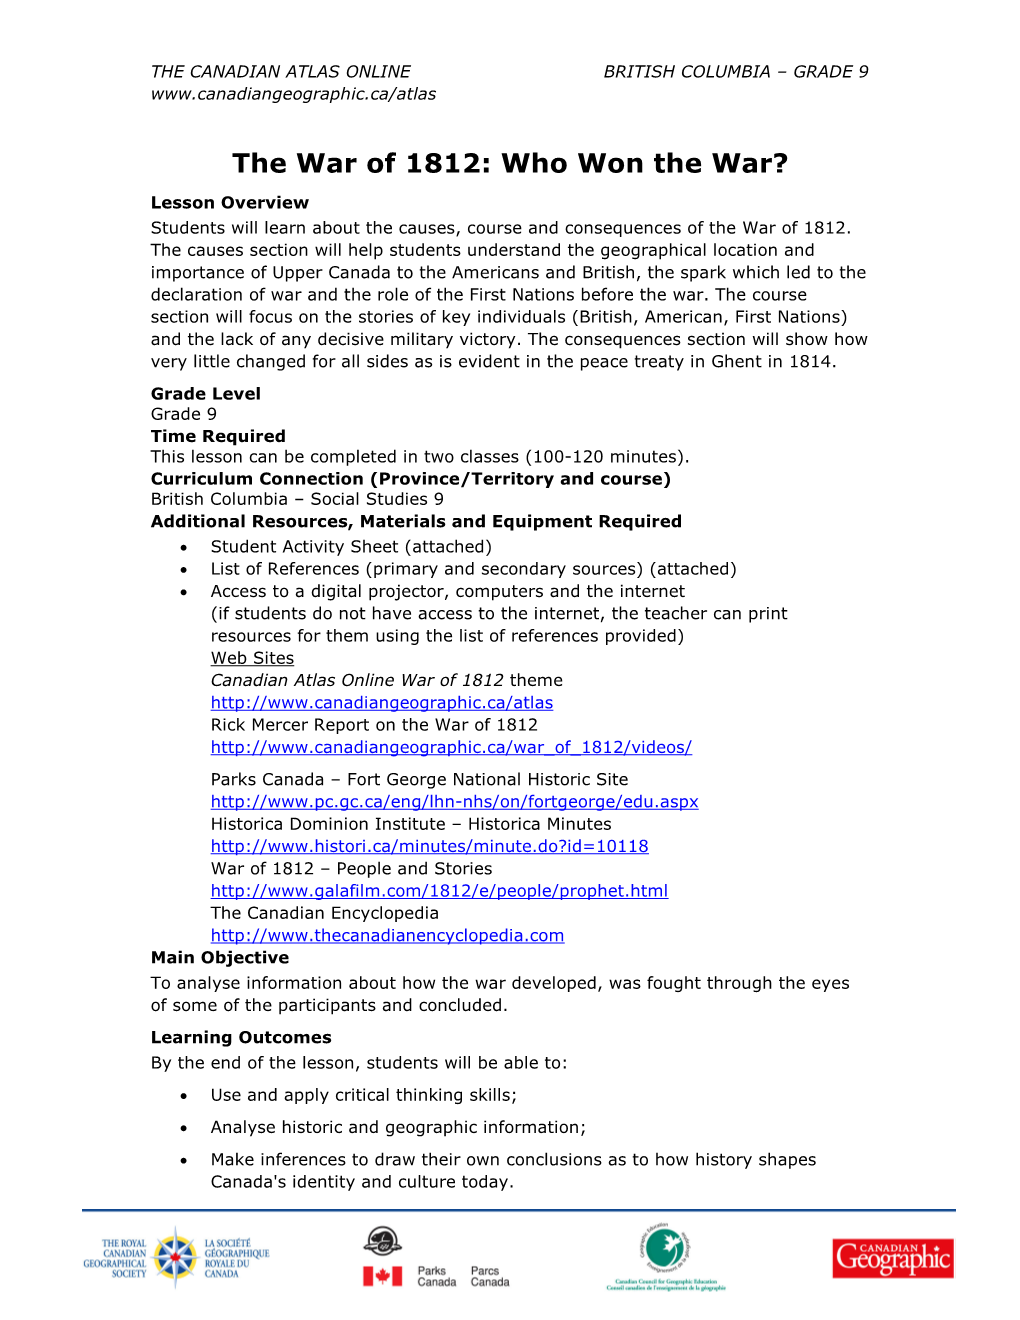 The War of 1812: Who Won the War?